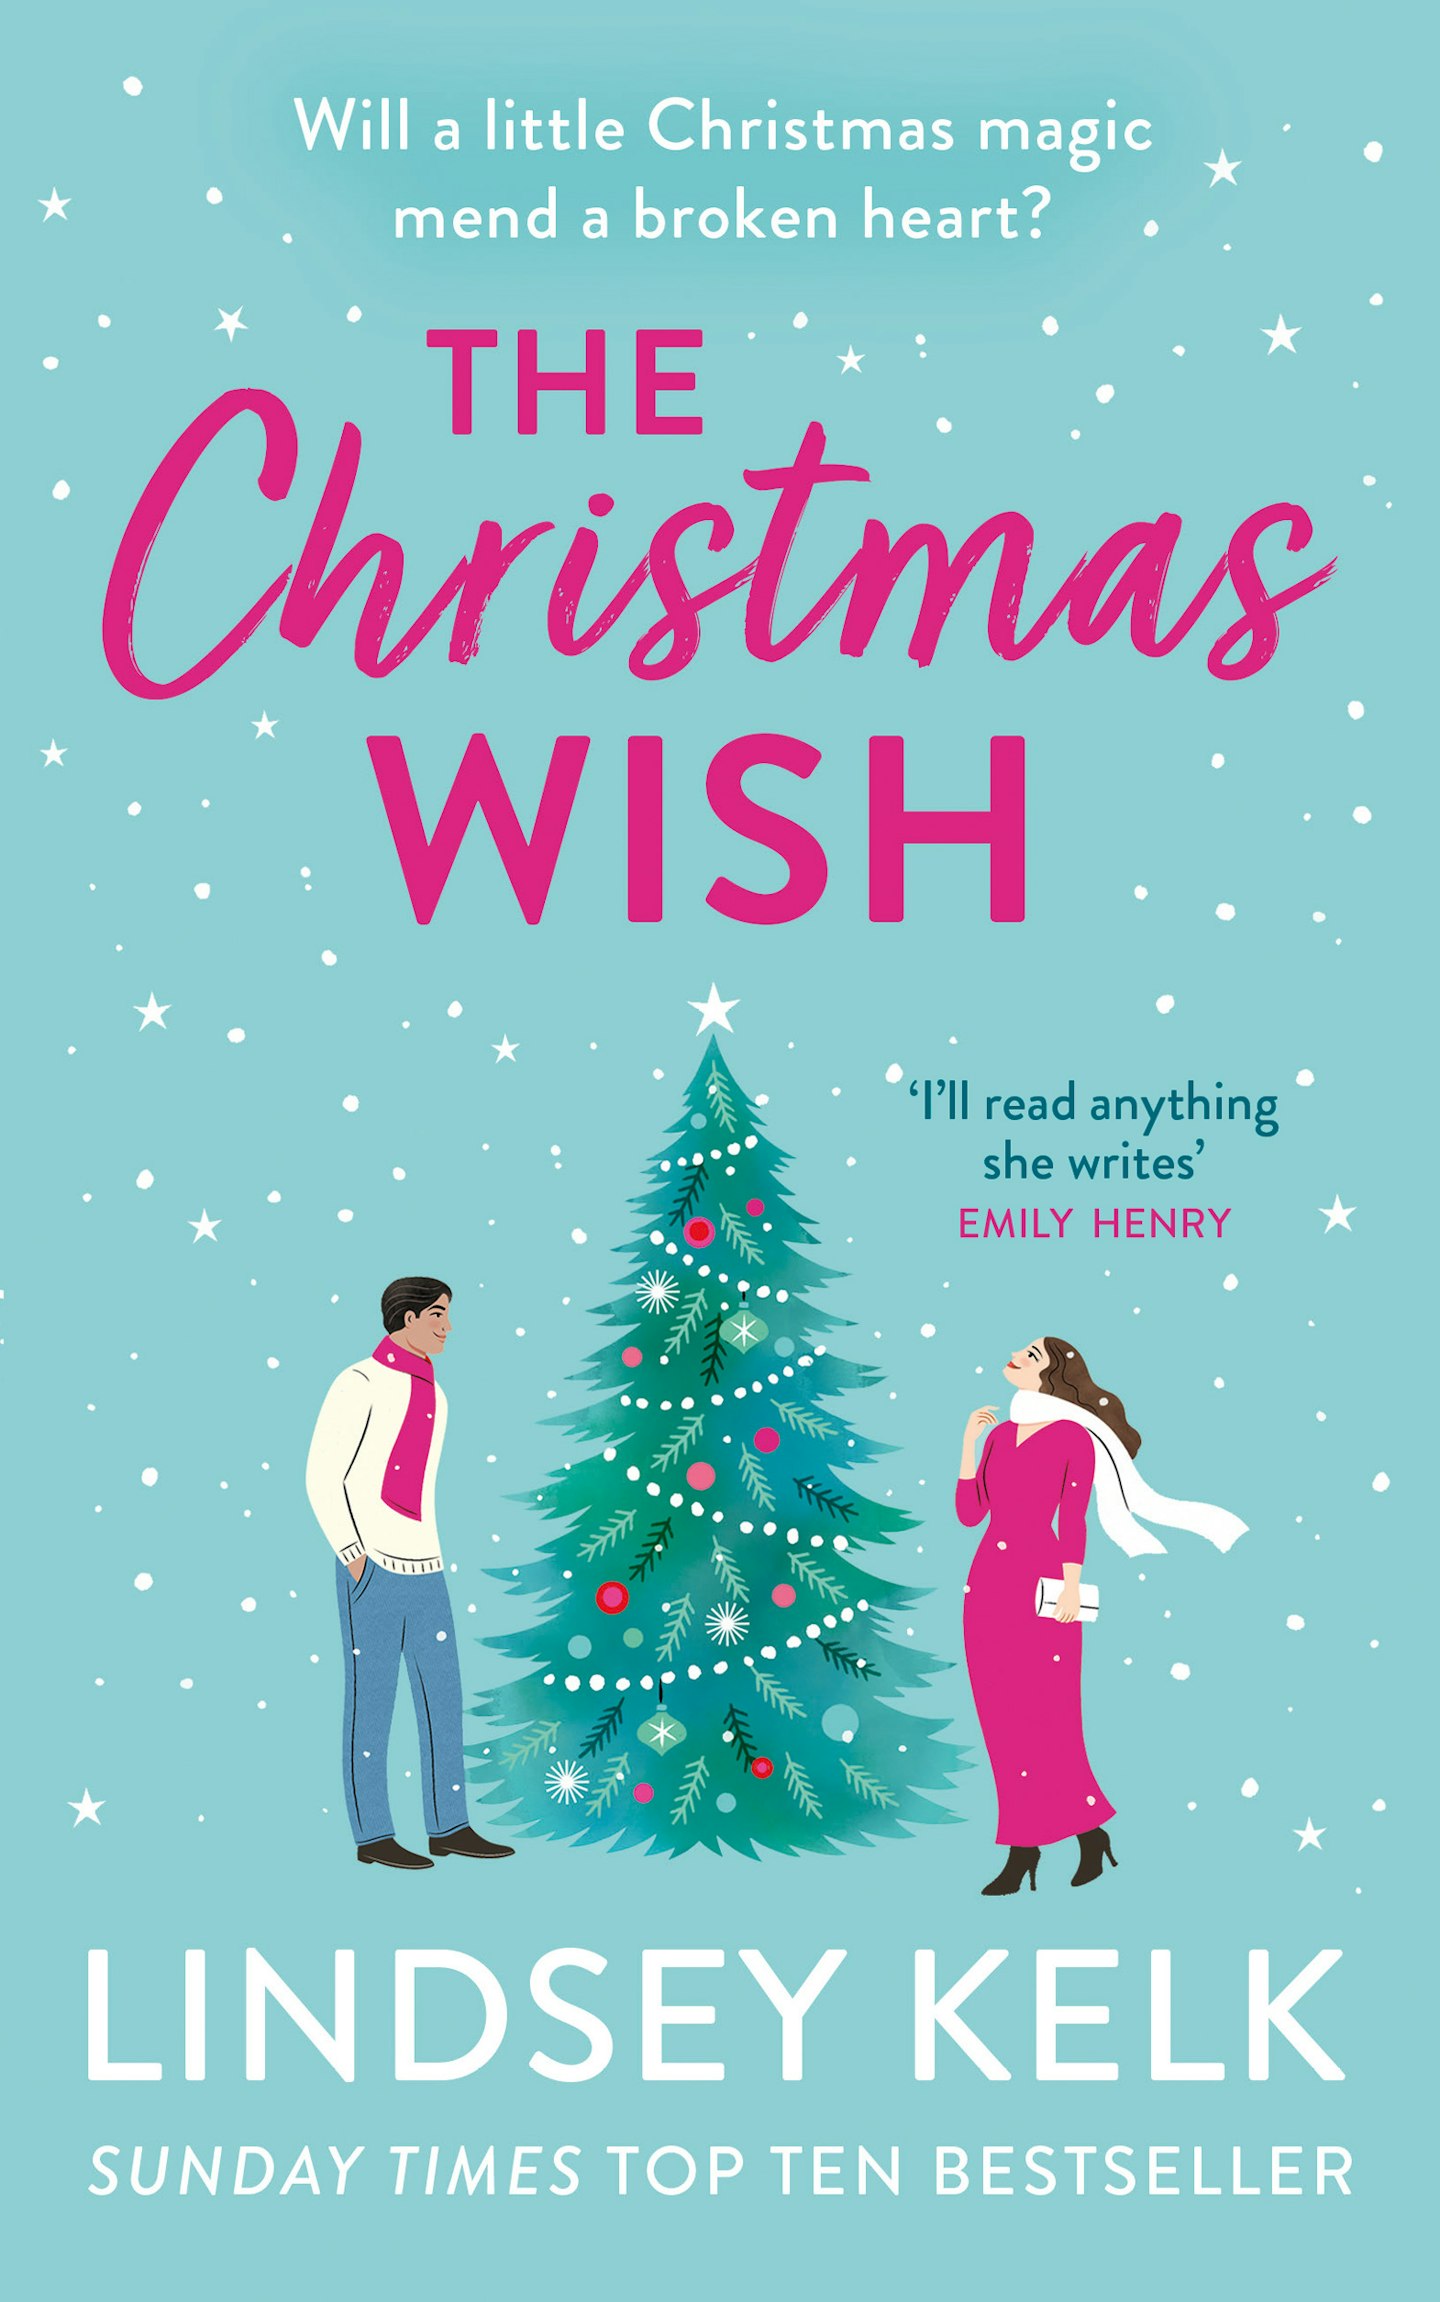 The Christmas Wish by Lindsey Kelk, published by HarperFiction, is out now in hardback, ebook and audio.